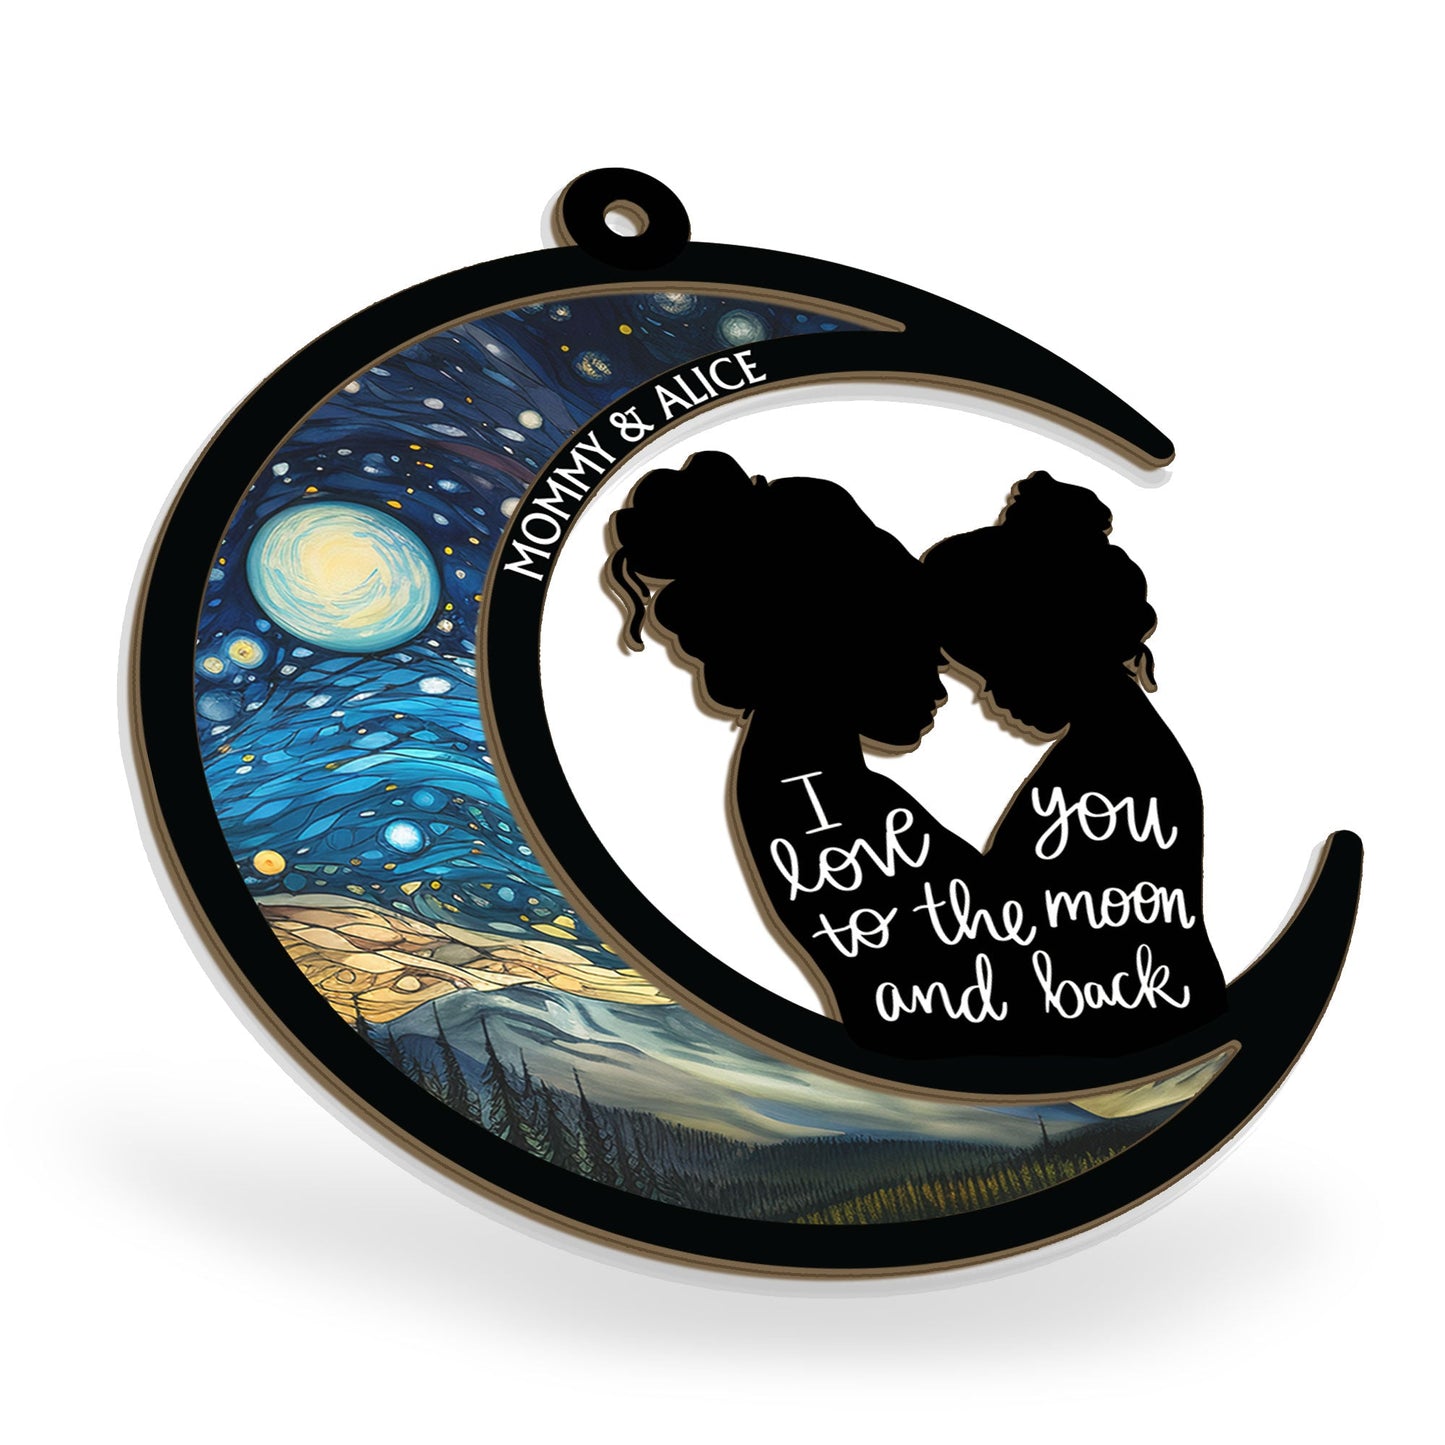 I Love You To The Moon & Back - Personalized Window Hanging Suncatcher Ornament